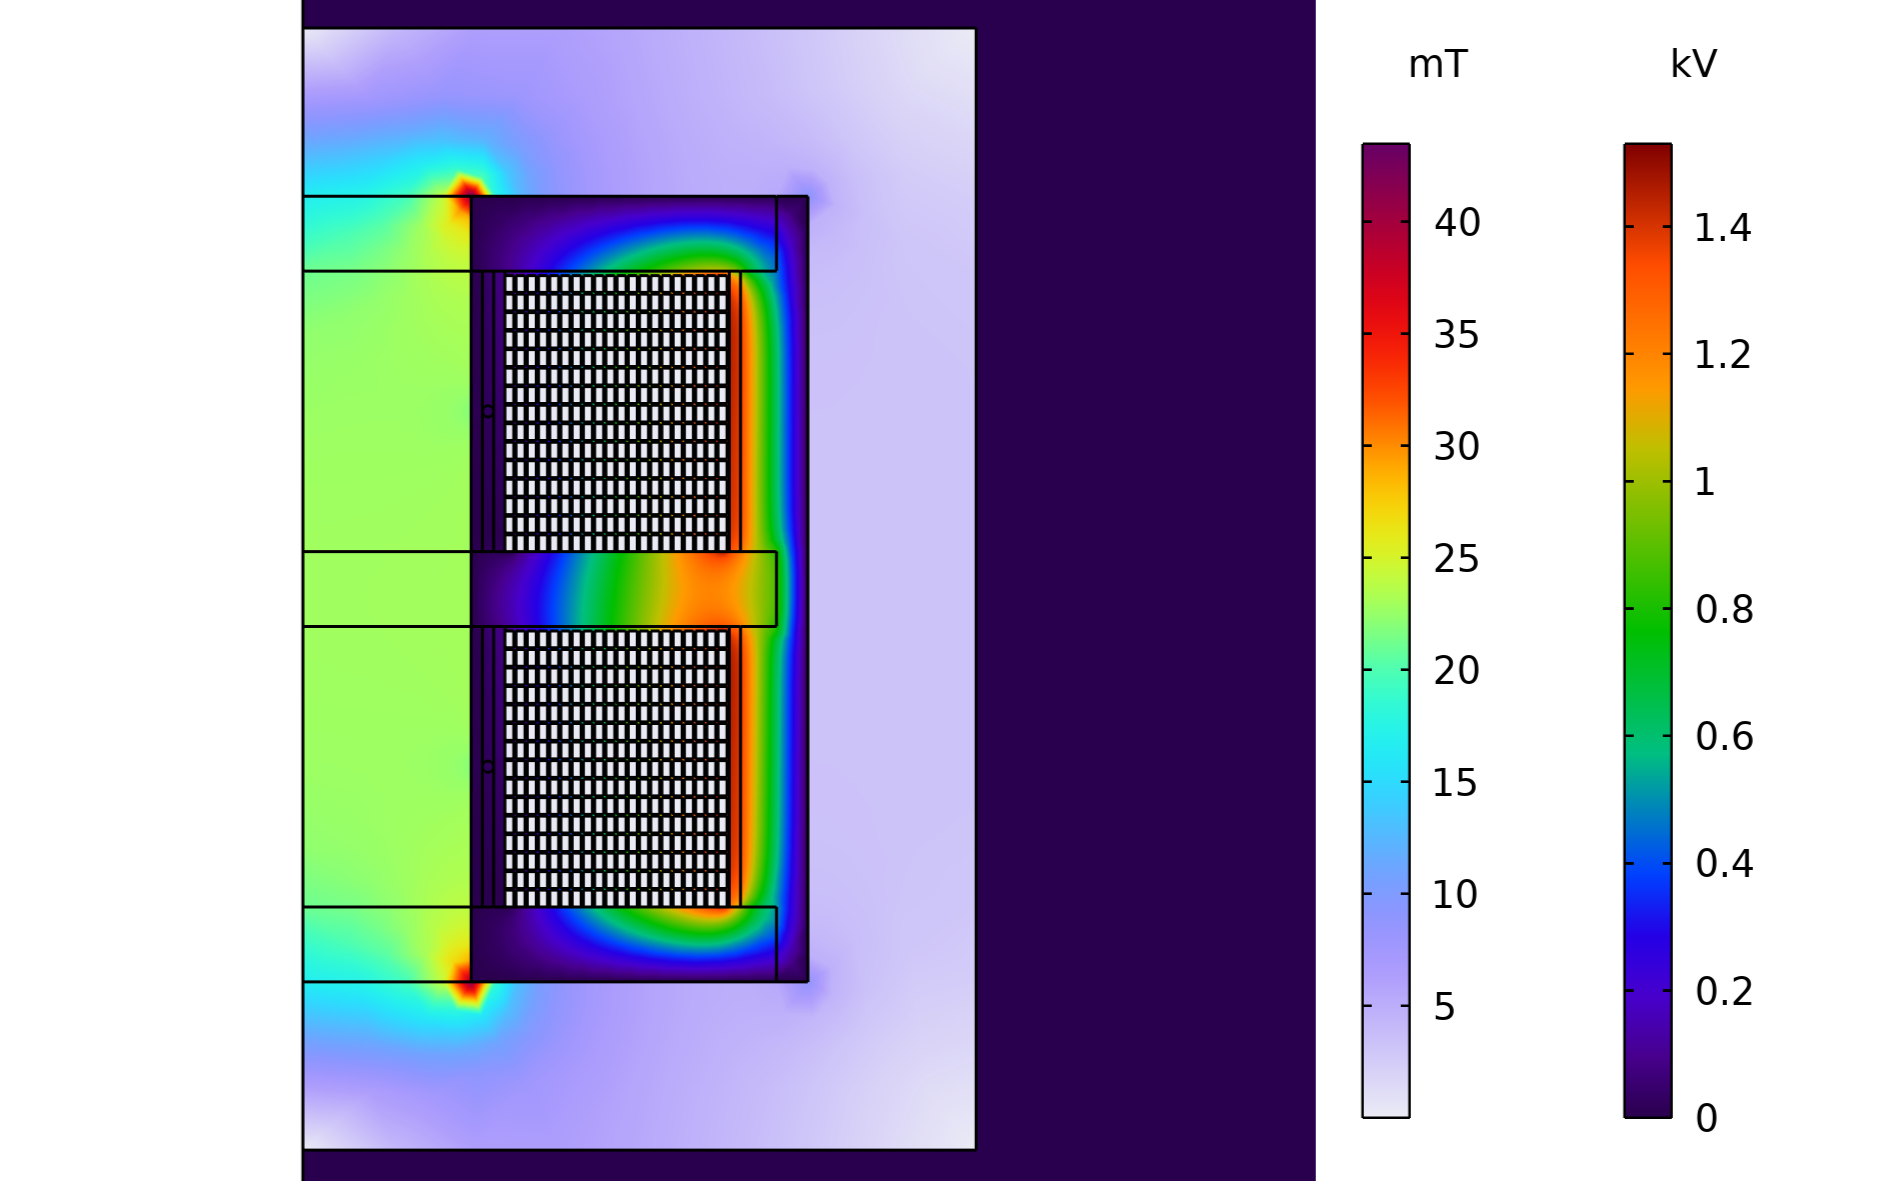 A simulation of the magnetic flux density and potential distribution in a 2D axisymmetric model of a transformer.